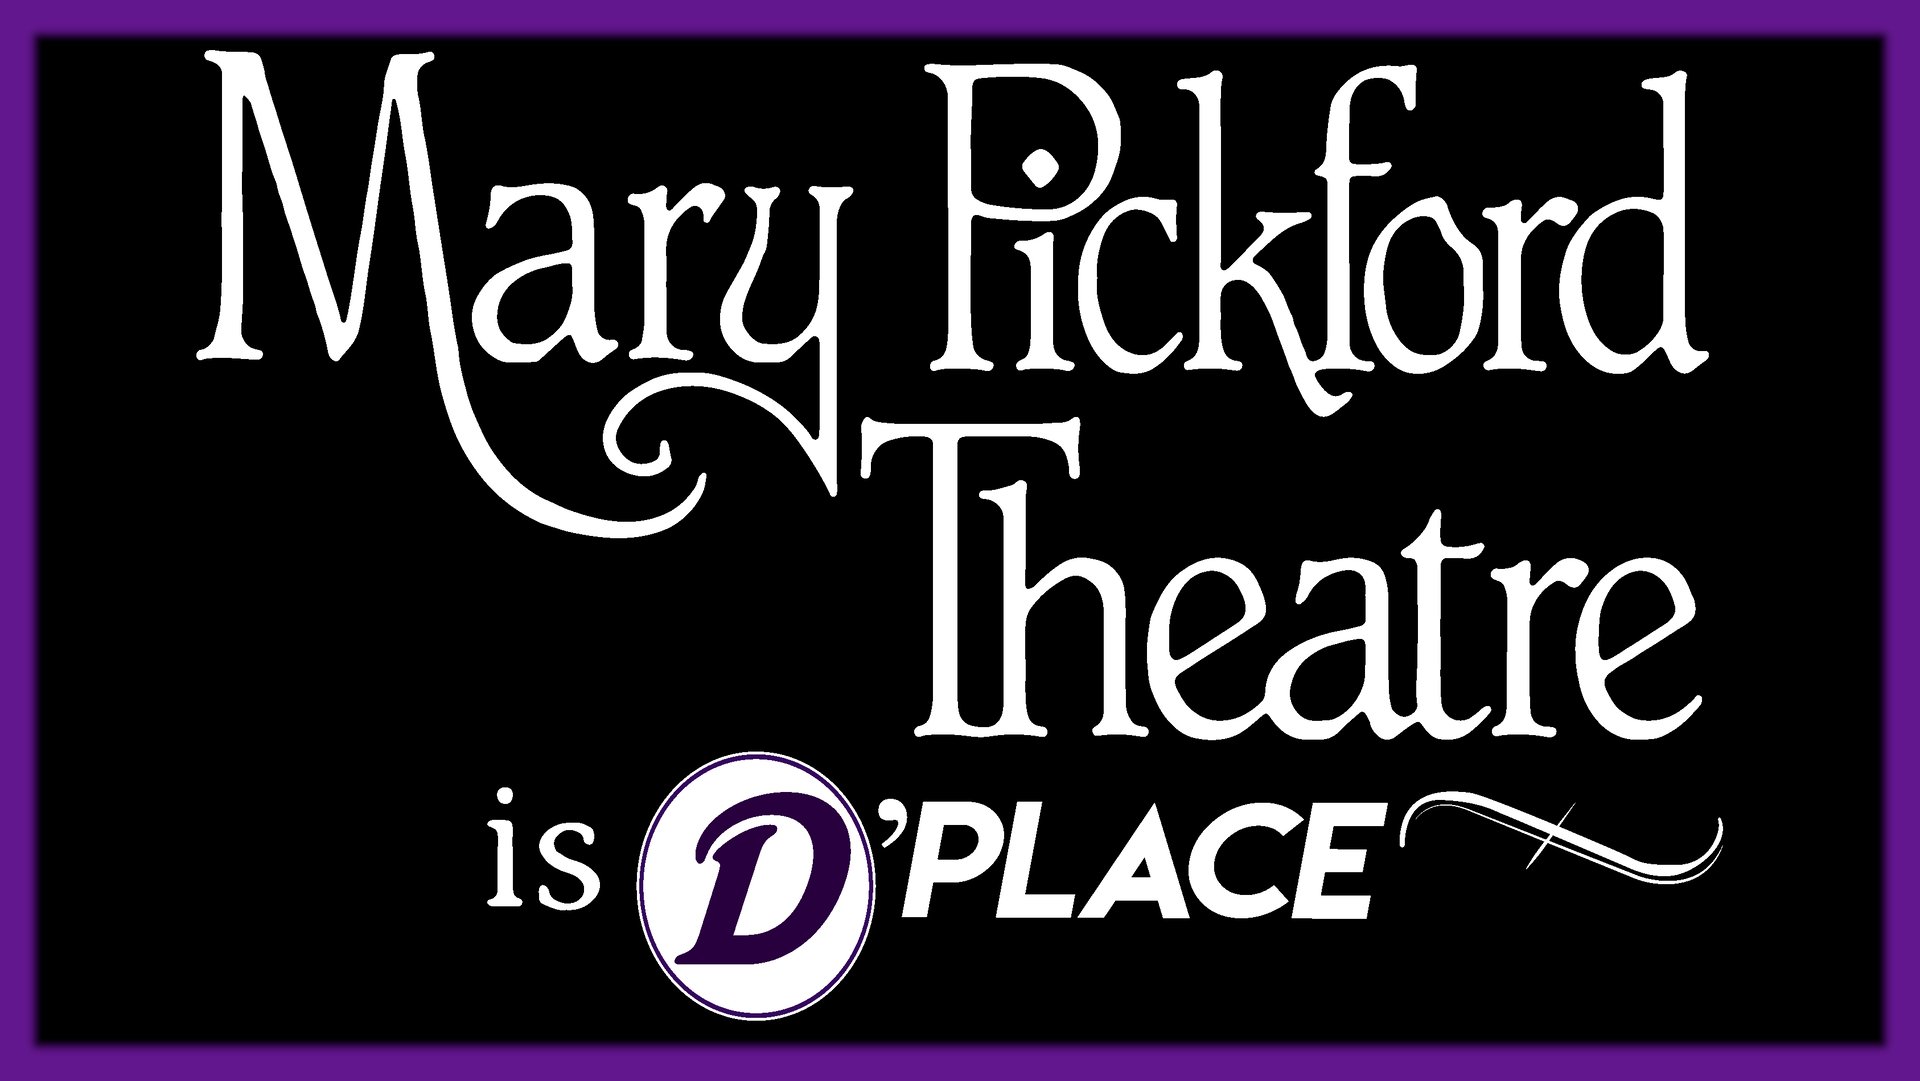 Mary Pickford is D'Place